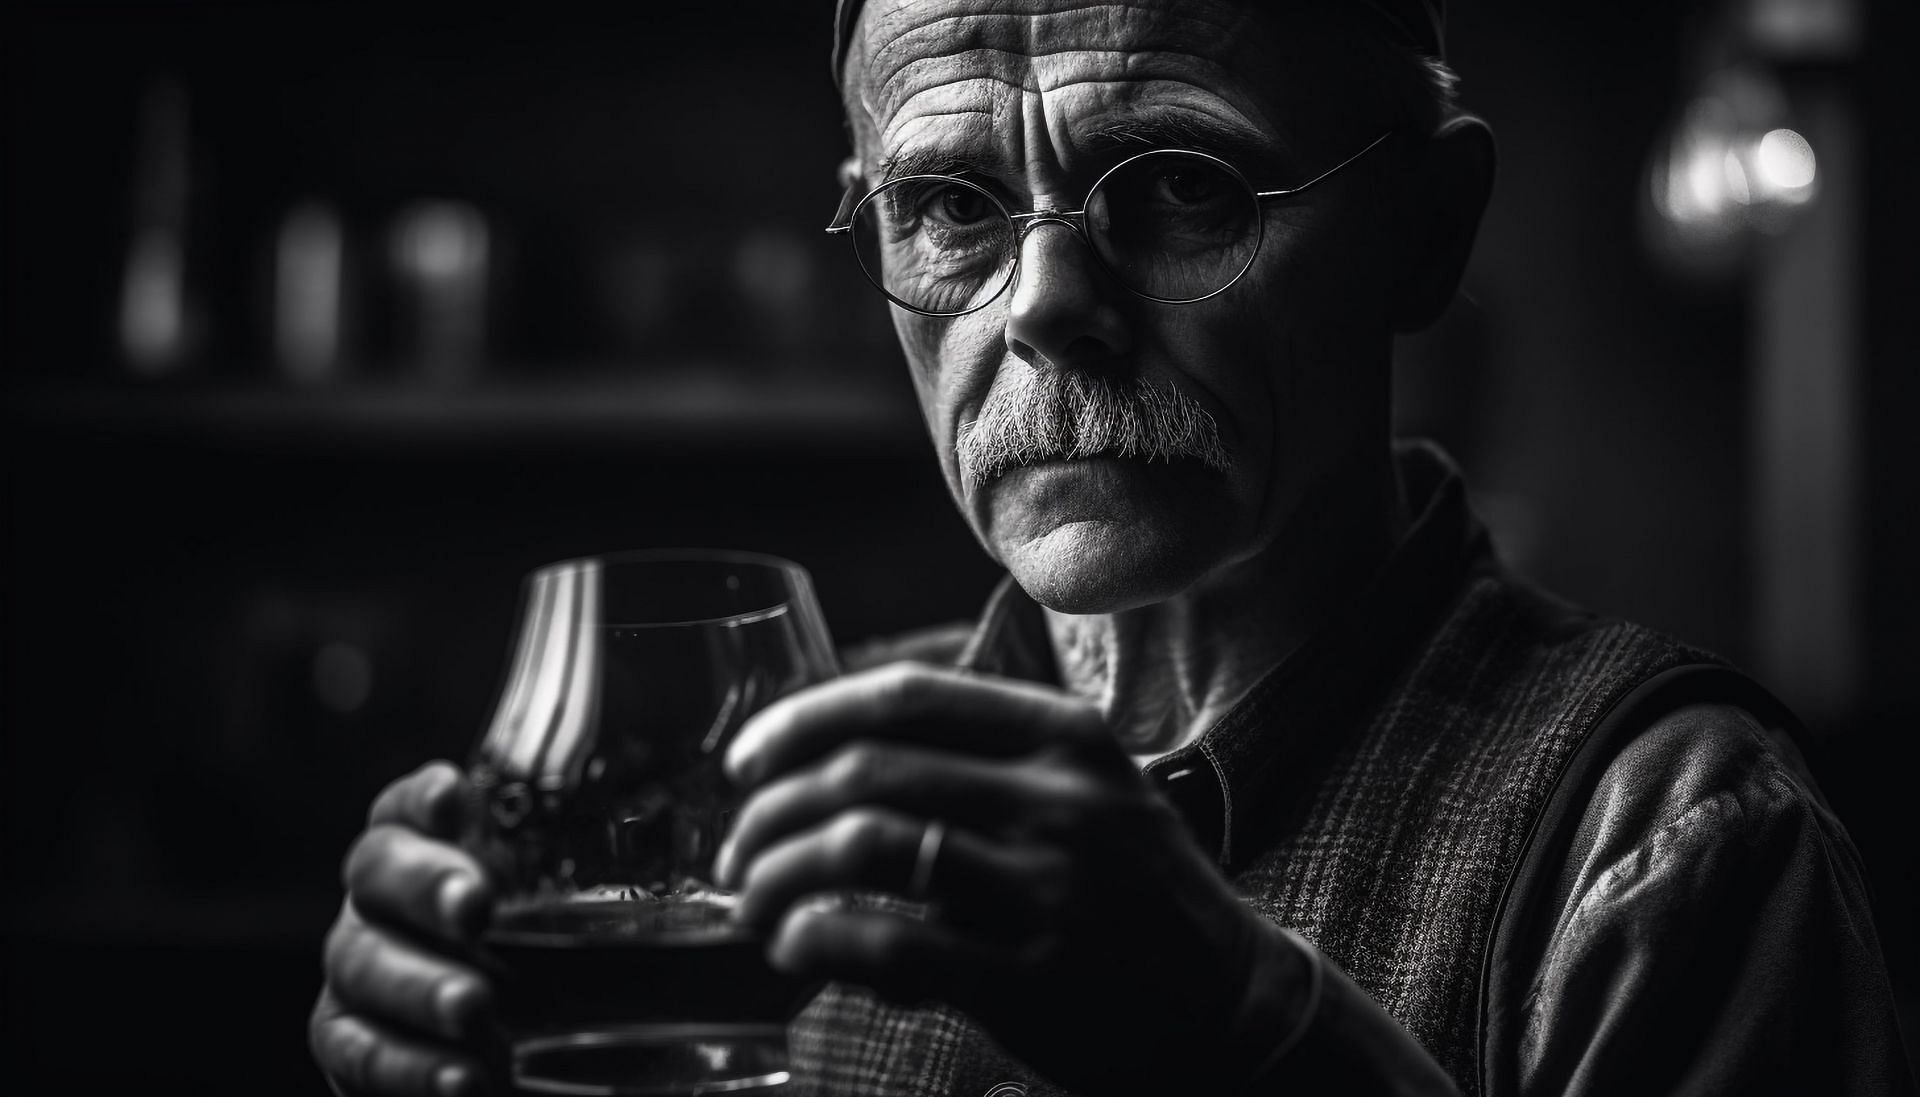 Alcohol dementia is not an uncommon phenomenon and can be harmful for both physical and mental health. (Image via vecteezy/ Andres Ramos)